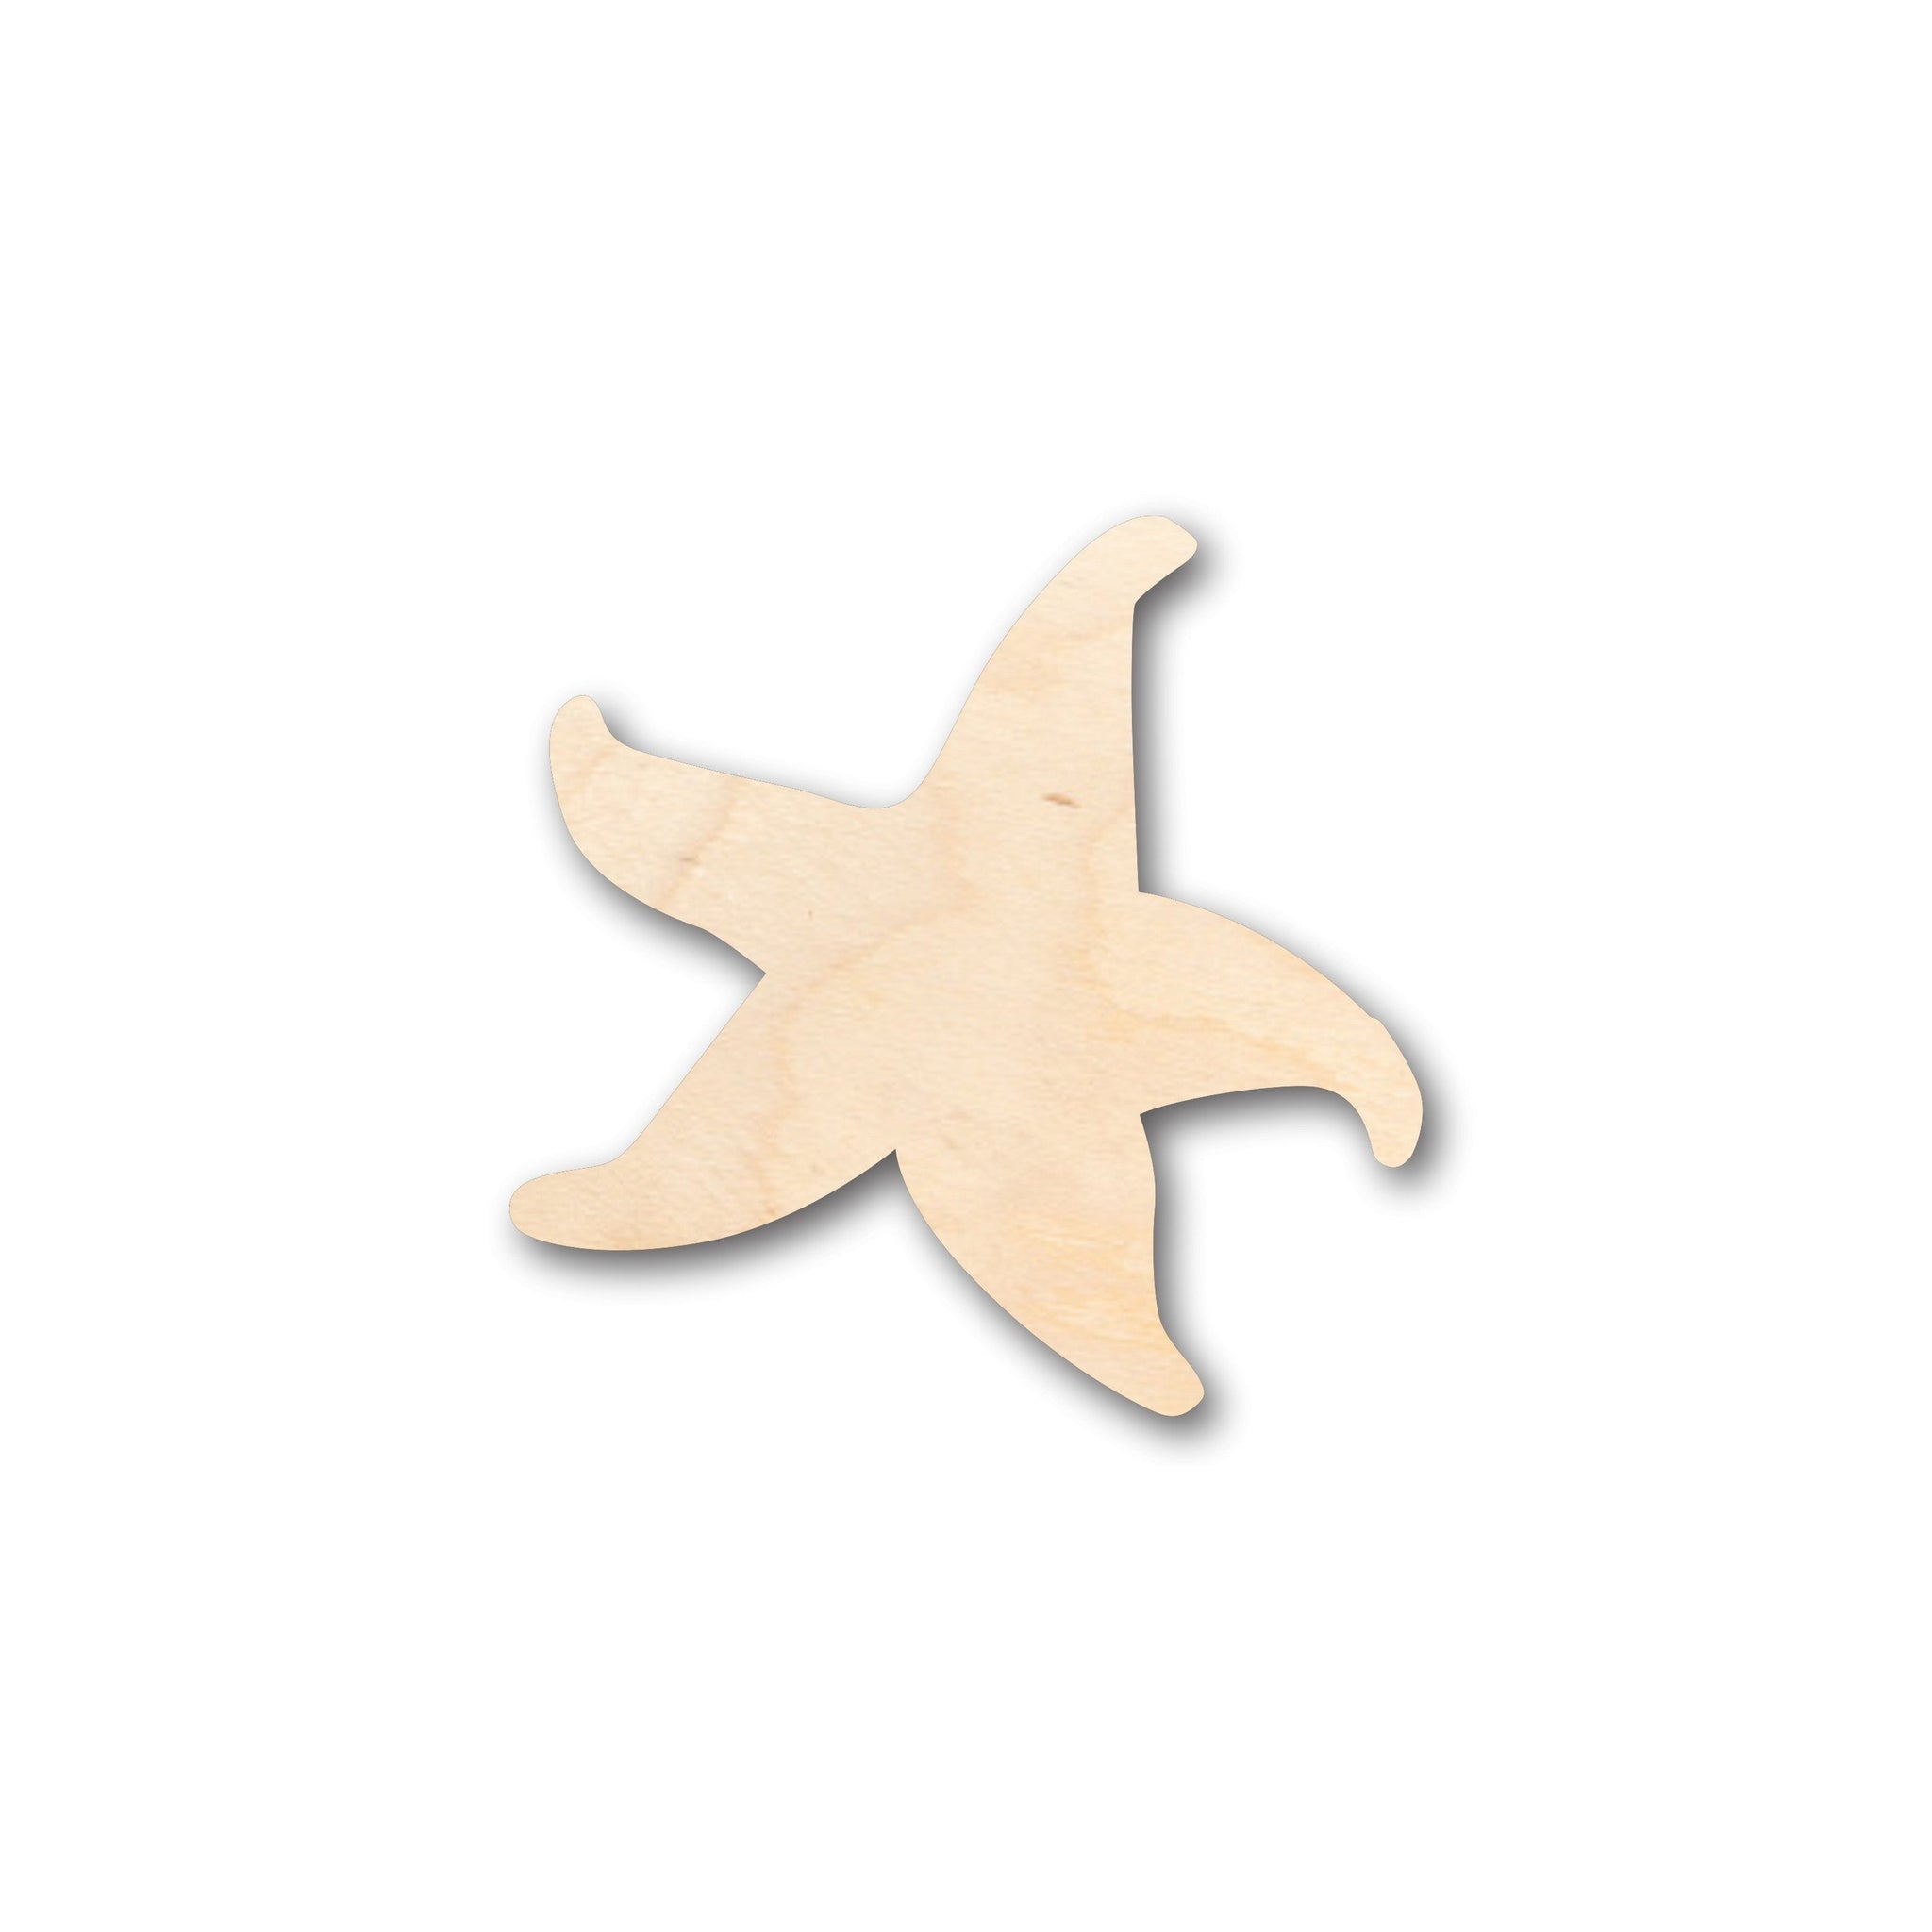 How to make paper starfish / sea star easy diy crafts 